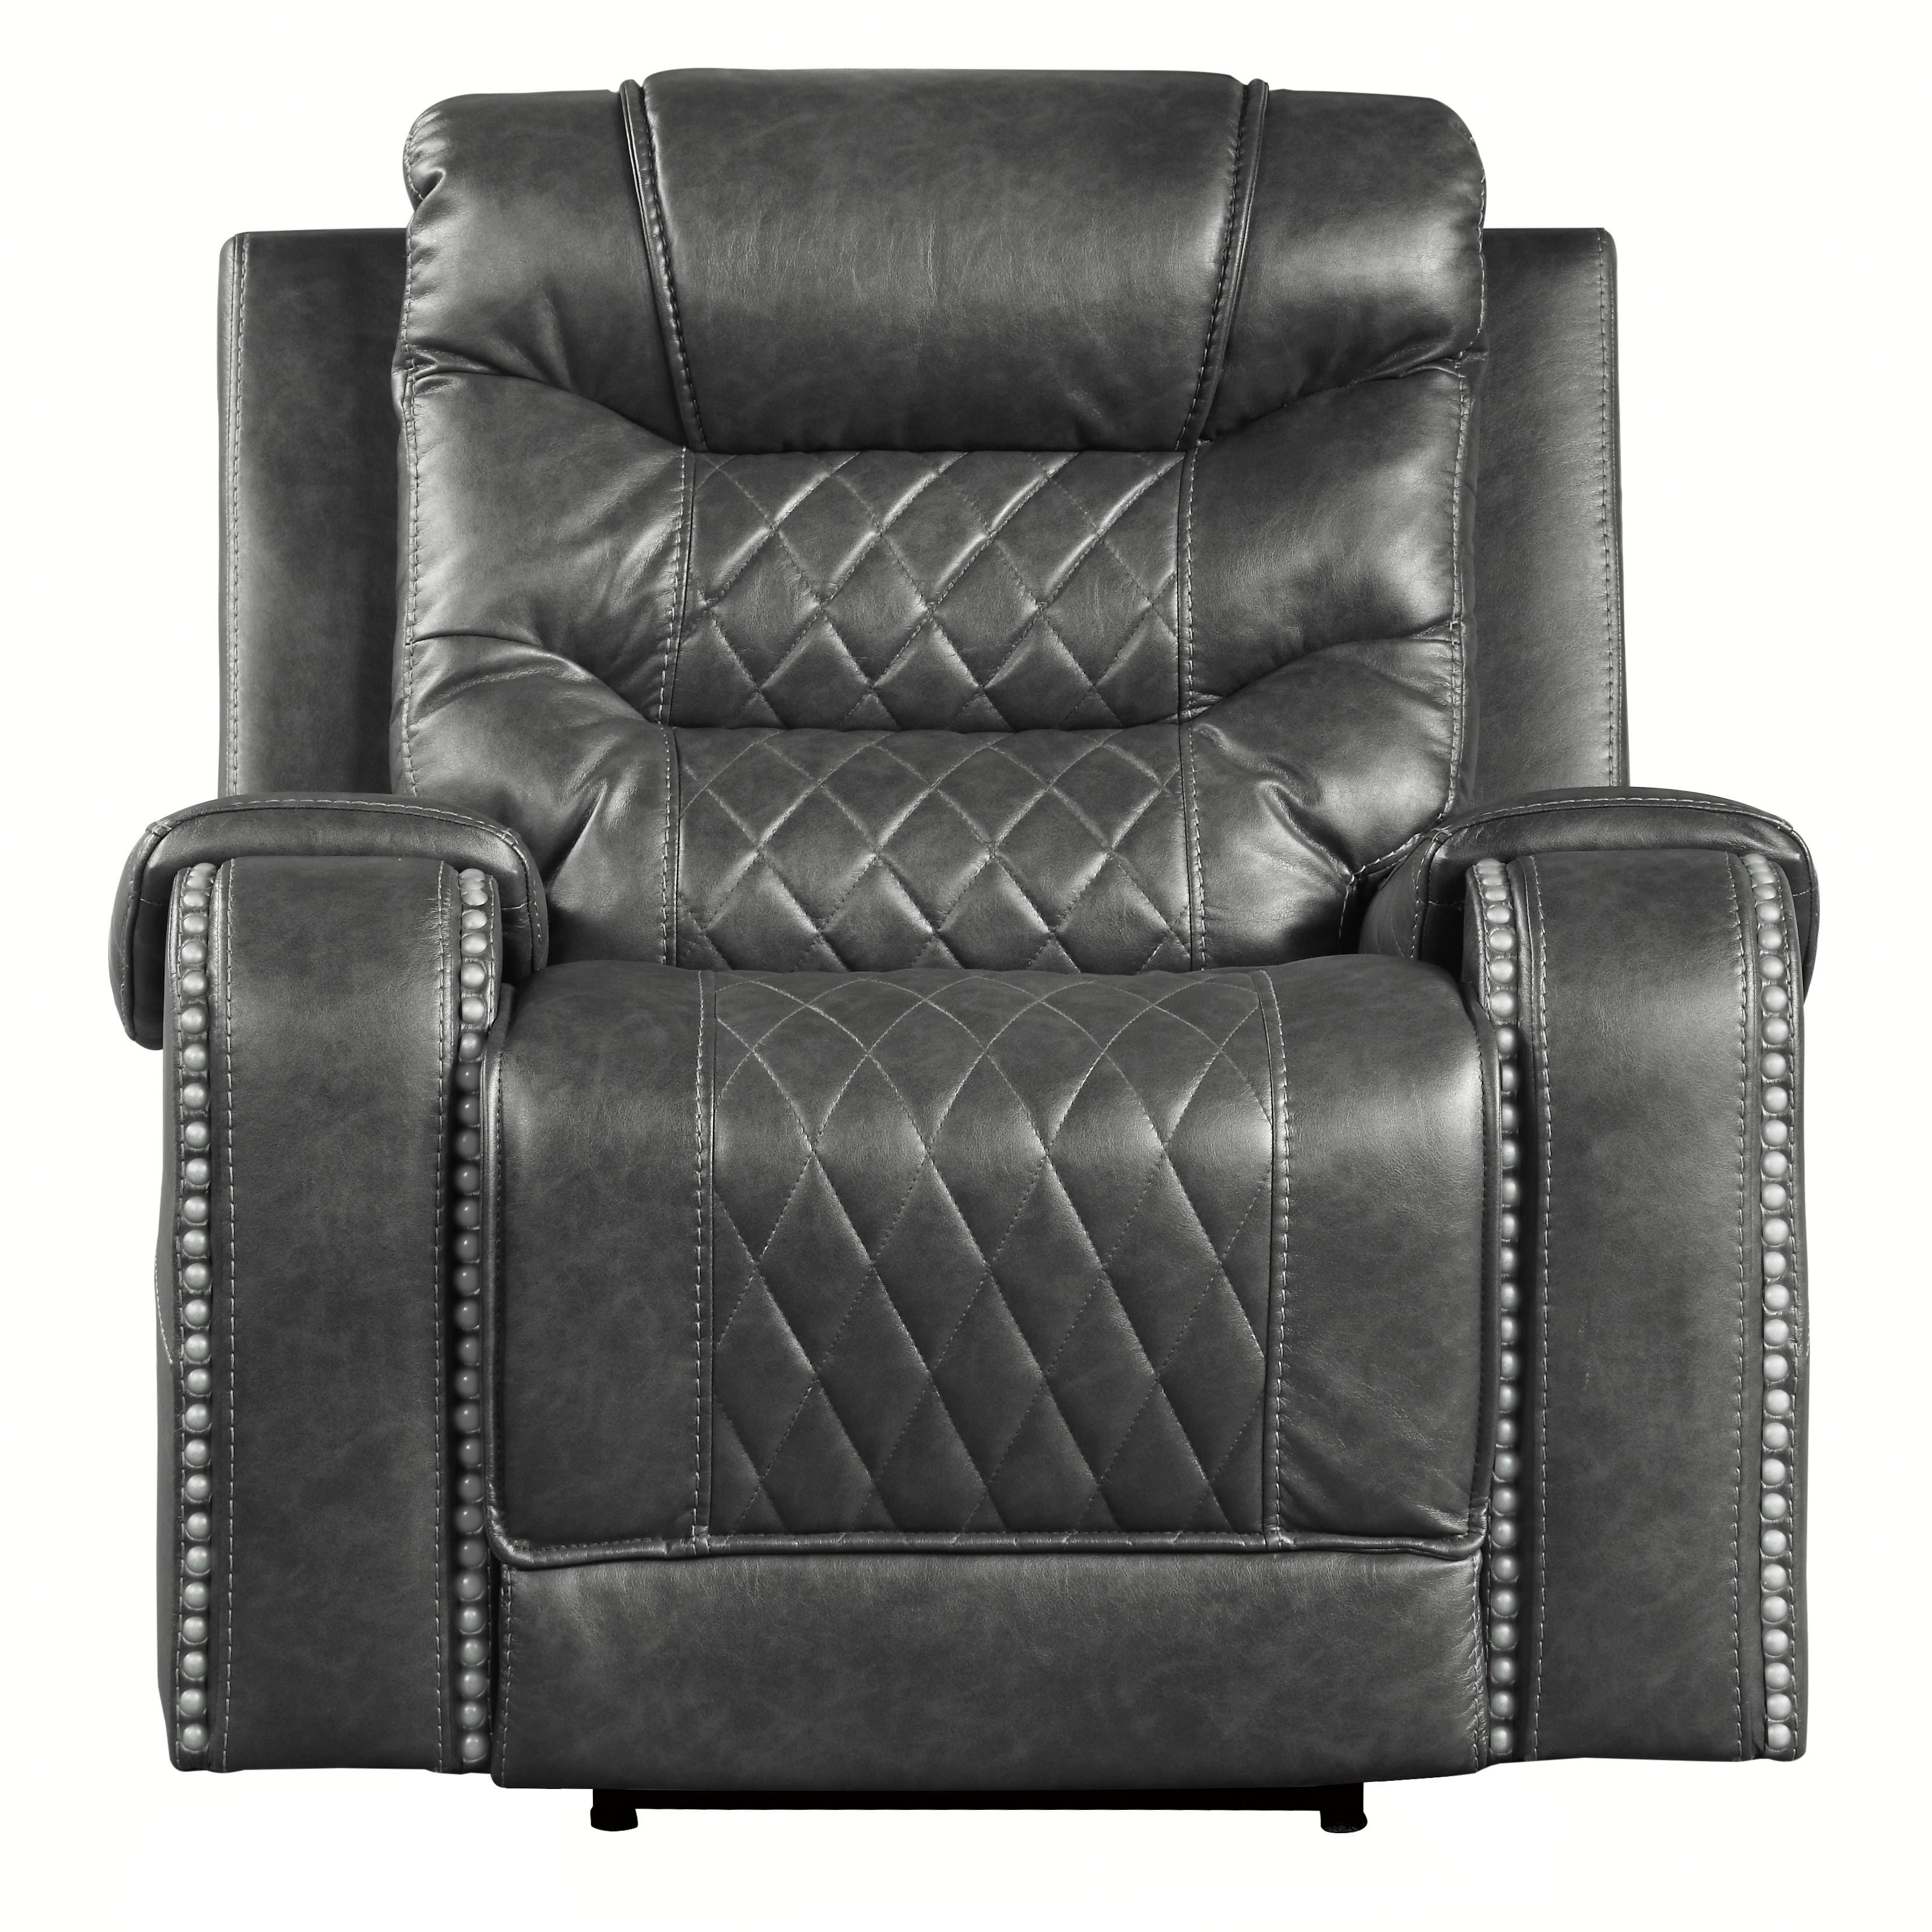 Homelegance 9405GY-1PW Putnam Power Reclining Chair